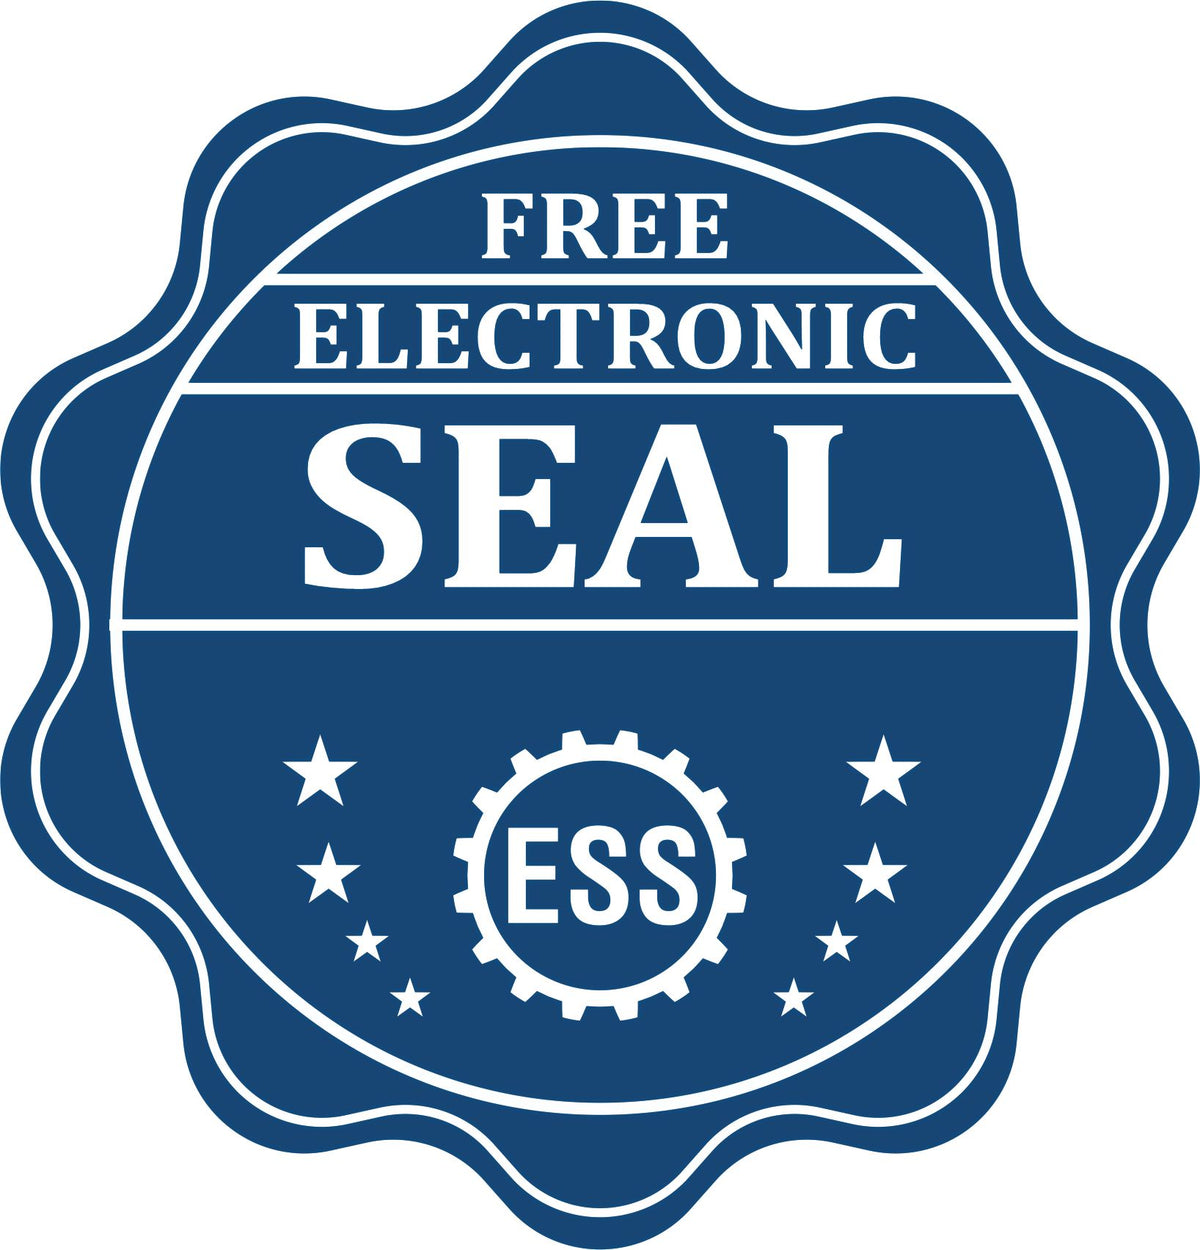 A badge showing a free electronic seal for the Vermont Geologist Desk Seal with stars and the ESS gear on the emblem.